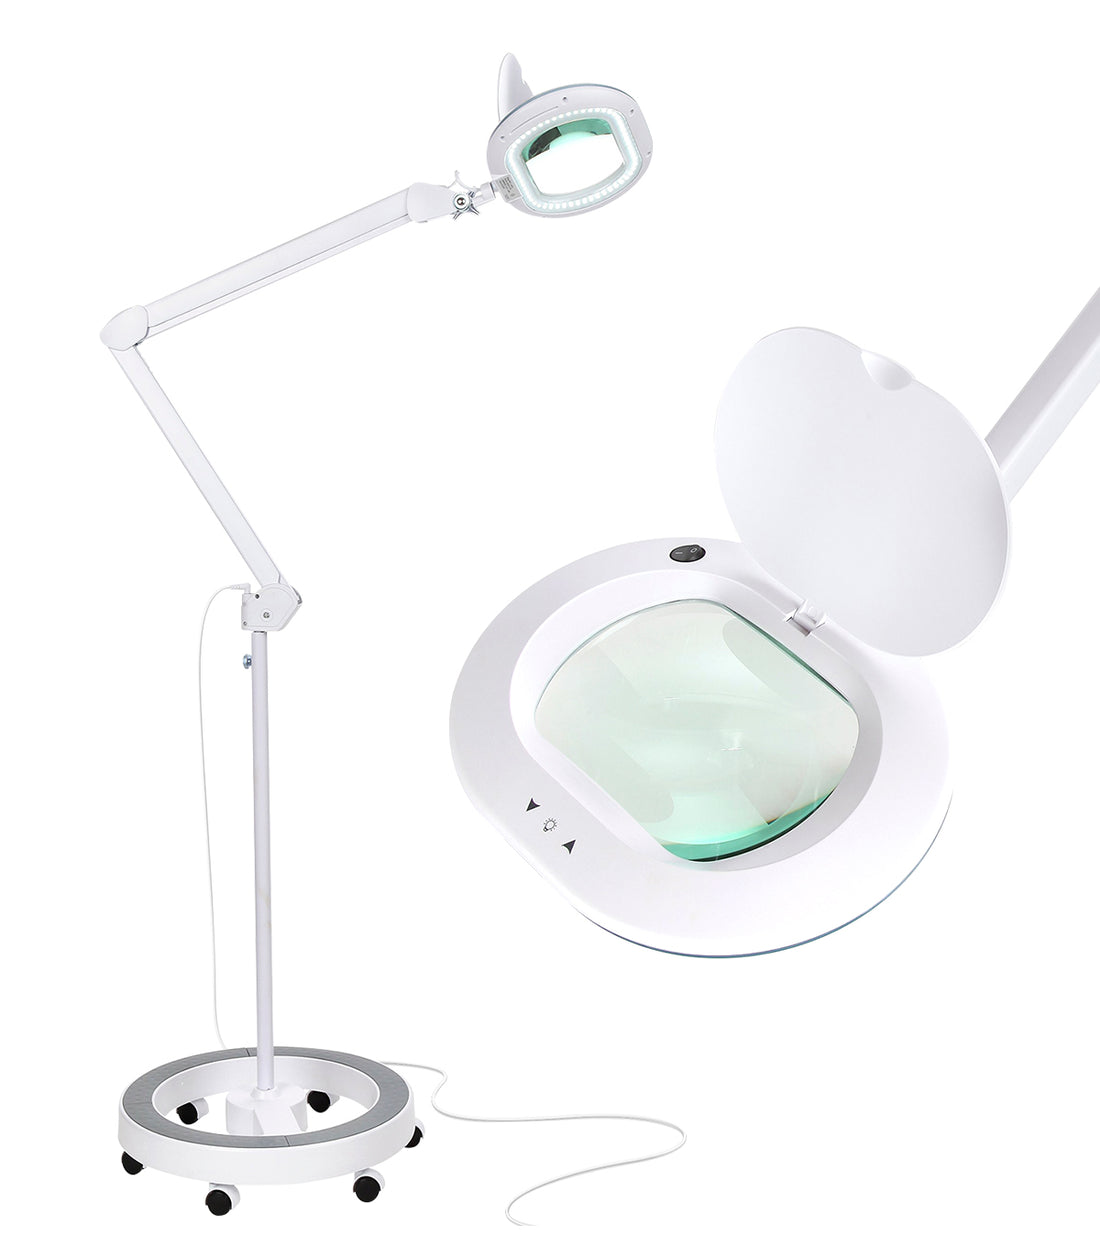 Magnifying Floor Lamp - Hands Free Magnifier for Reading or Hobbies